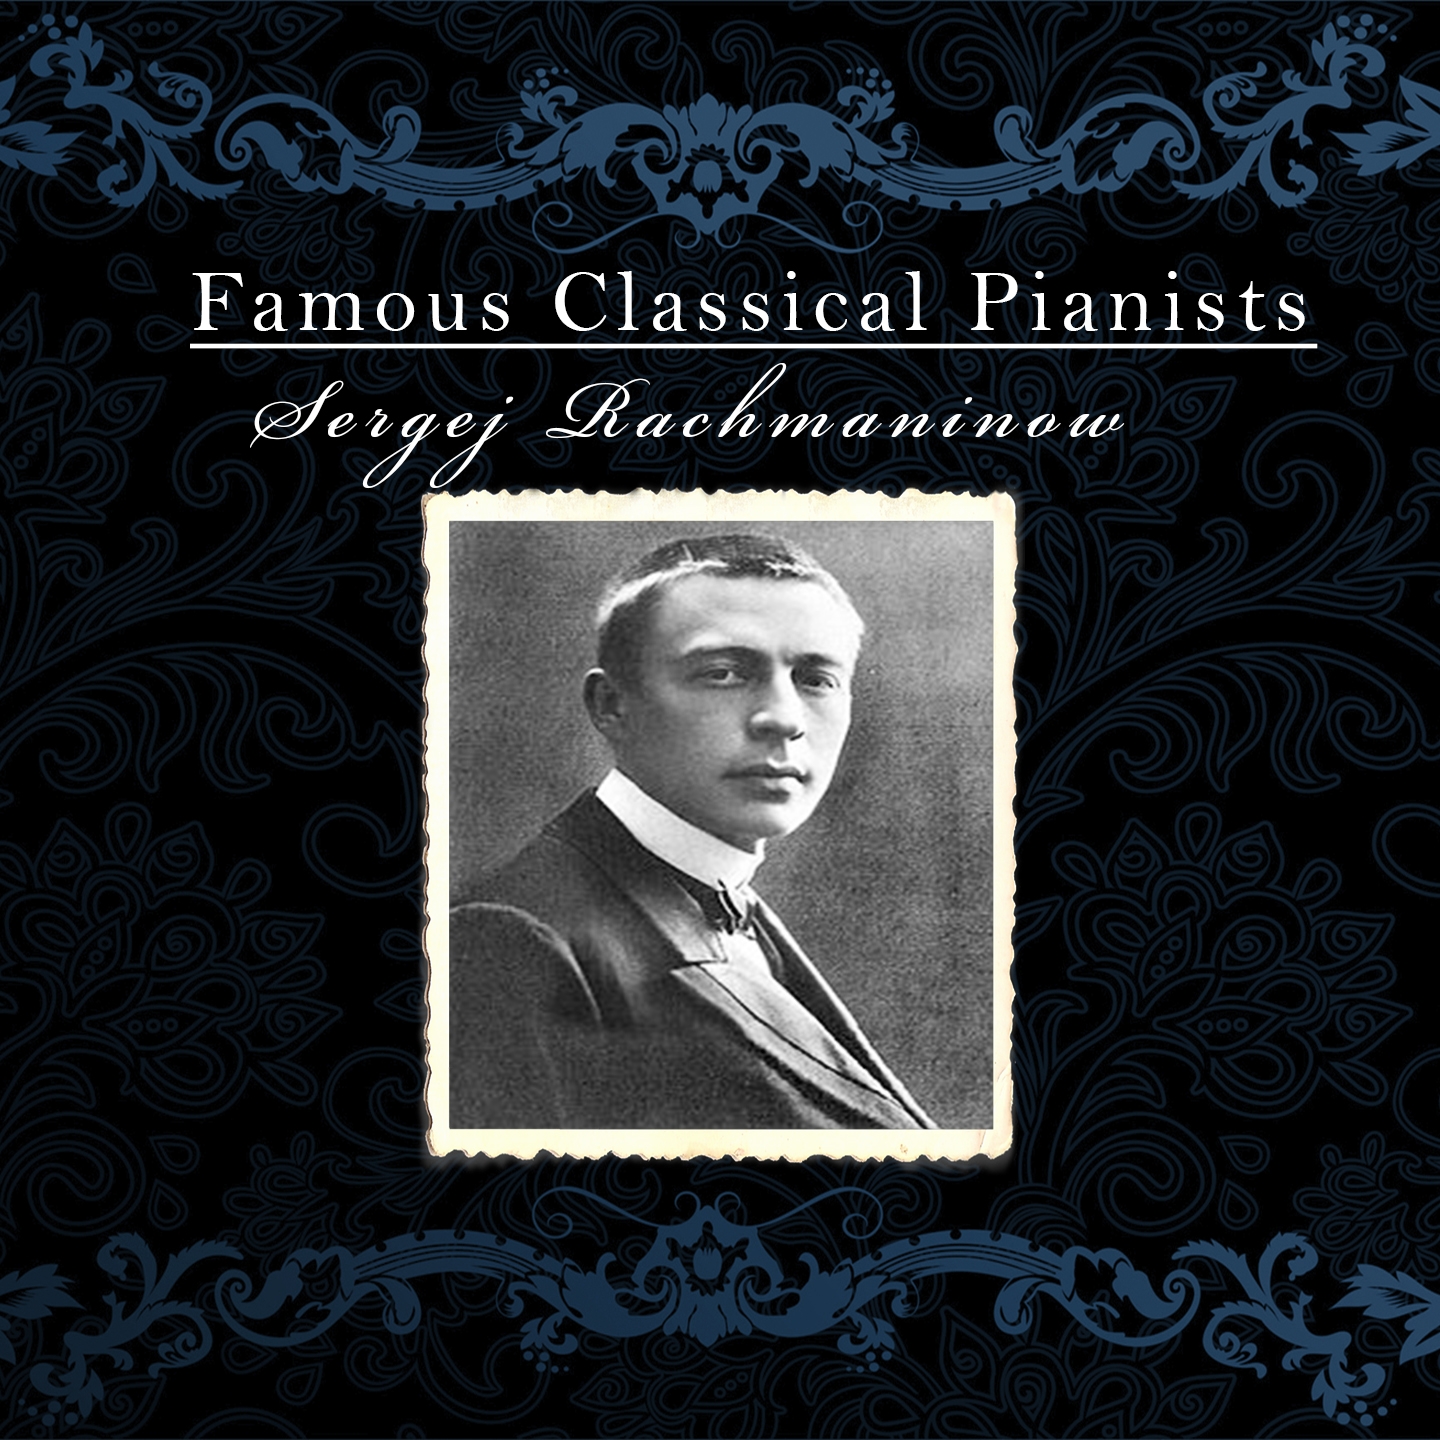 Rachmaninoff: Piano Concertos Nos. 2 & 3 (Famous Classical Pianists)